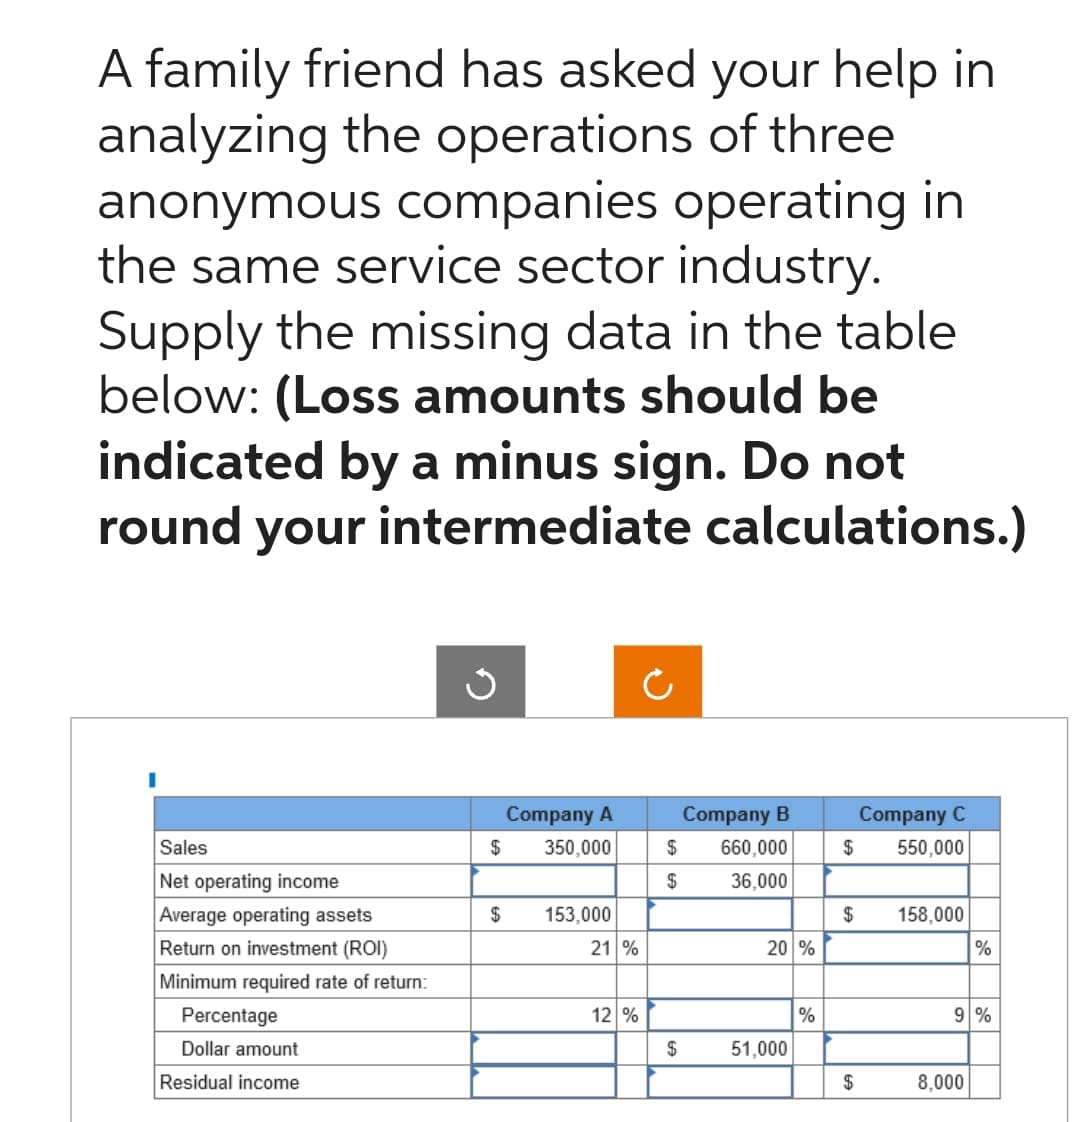 A family friend has asked your help in
analyzing the operations of three
anonymous companies operating in
the same service sector industry.
Supply the missing data in the table
below: (Loss amounts should be
indicated by a minus sign. Do not
round your intermediate calculations.)
Sales
Net operating income
Average operating assets
Return on investment (ROI)
Minimum required rate of return:
Percentage
Dollar amount
Residual income
Company A
$ 350,000
$
153,000
21 %
12 %
Company B
$ 660,000
$
36,000
$
20 %
51,000
%
$
$
$
Company C
550,000
158,000
%
9%
8,000